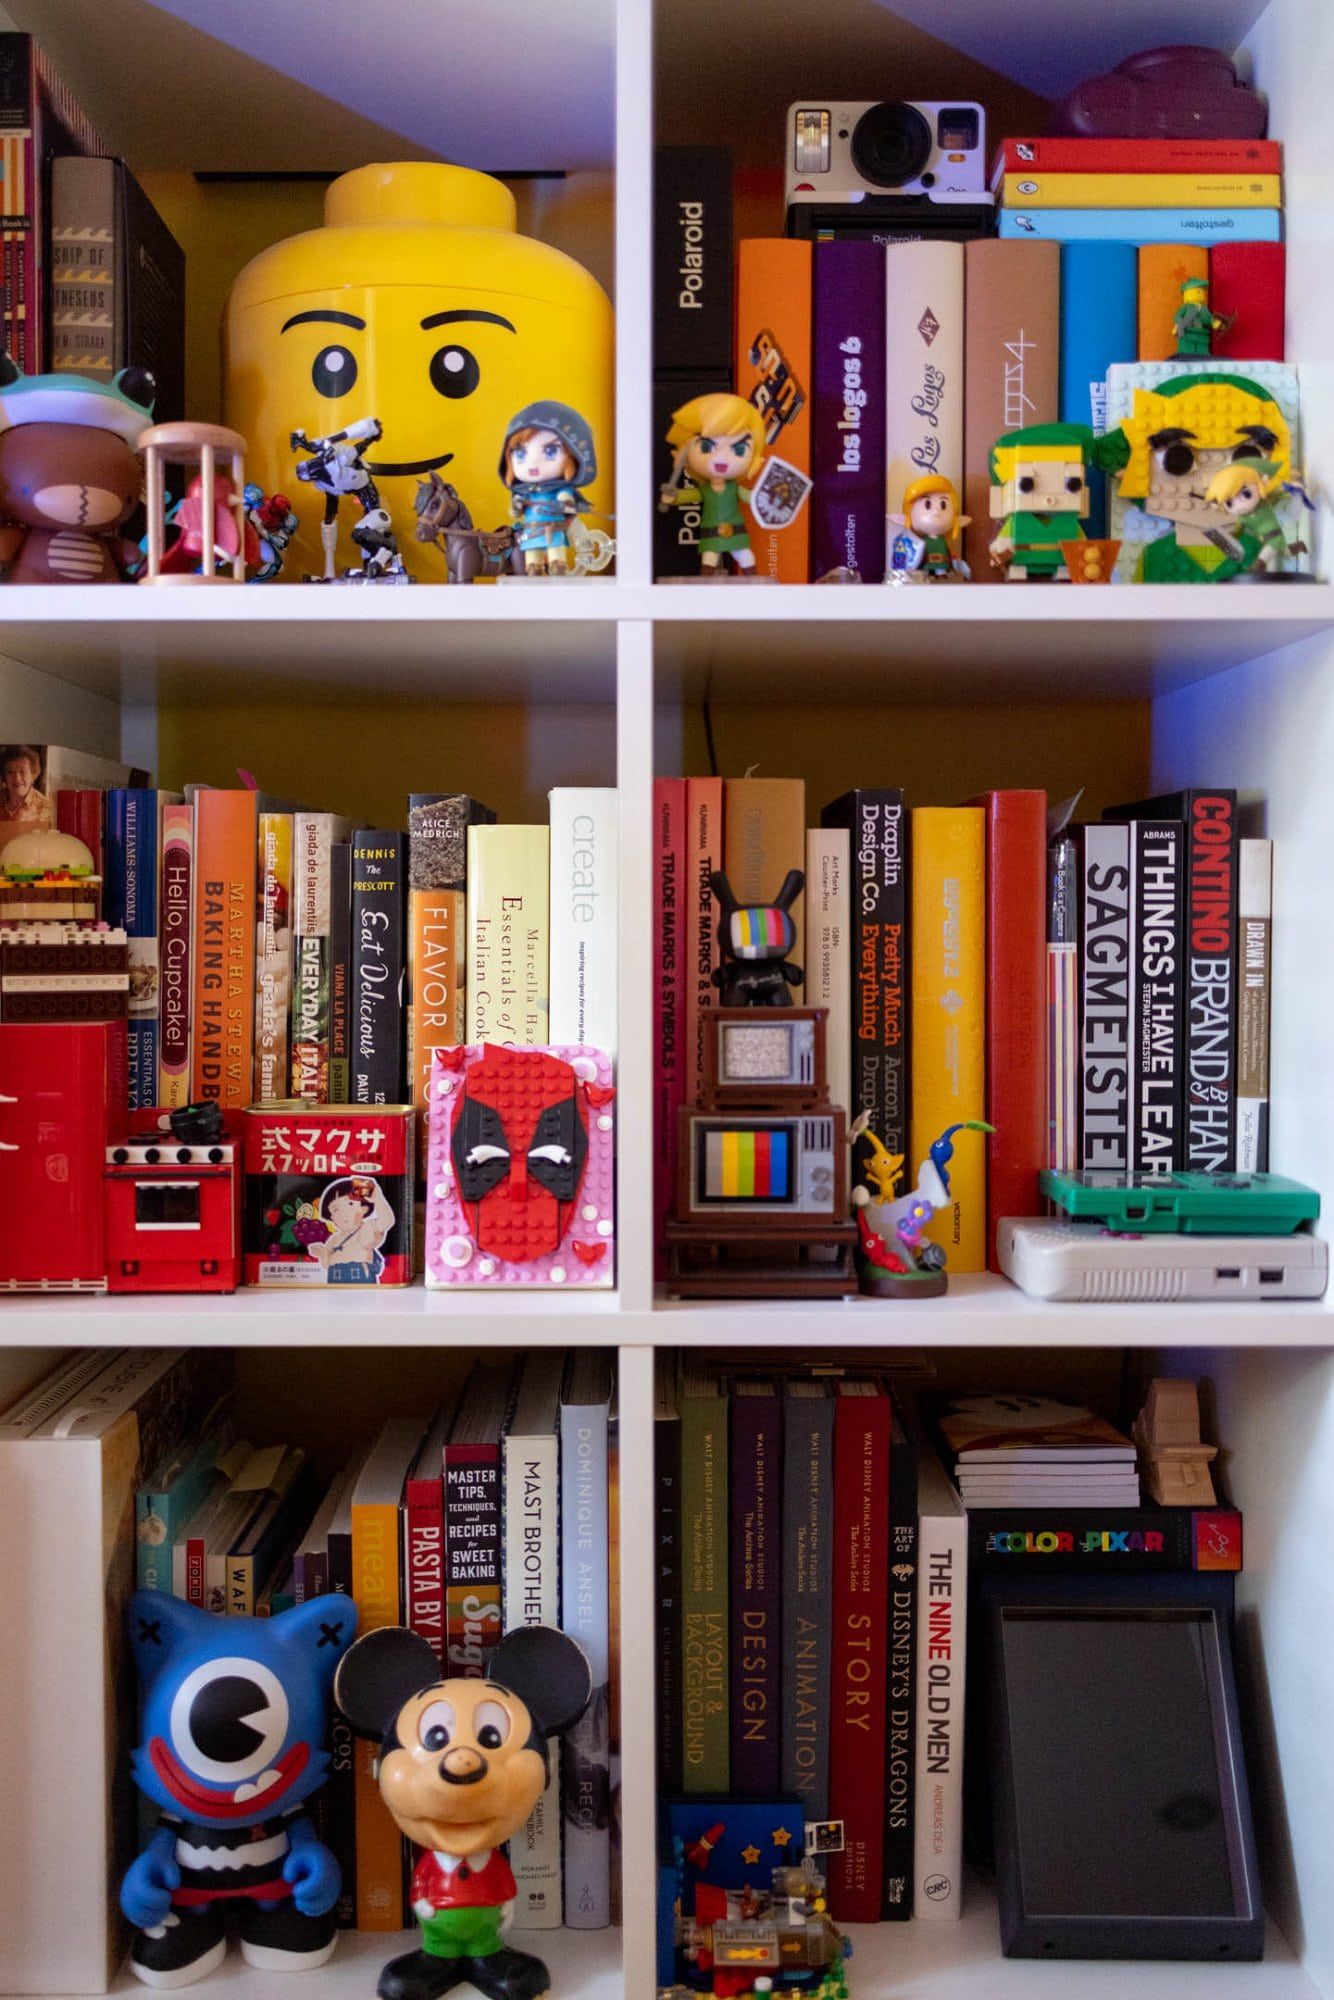 The shelf with books, toys, cameras and games